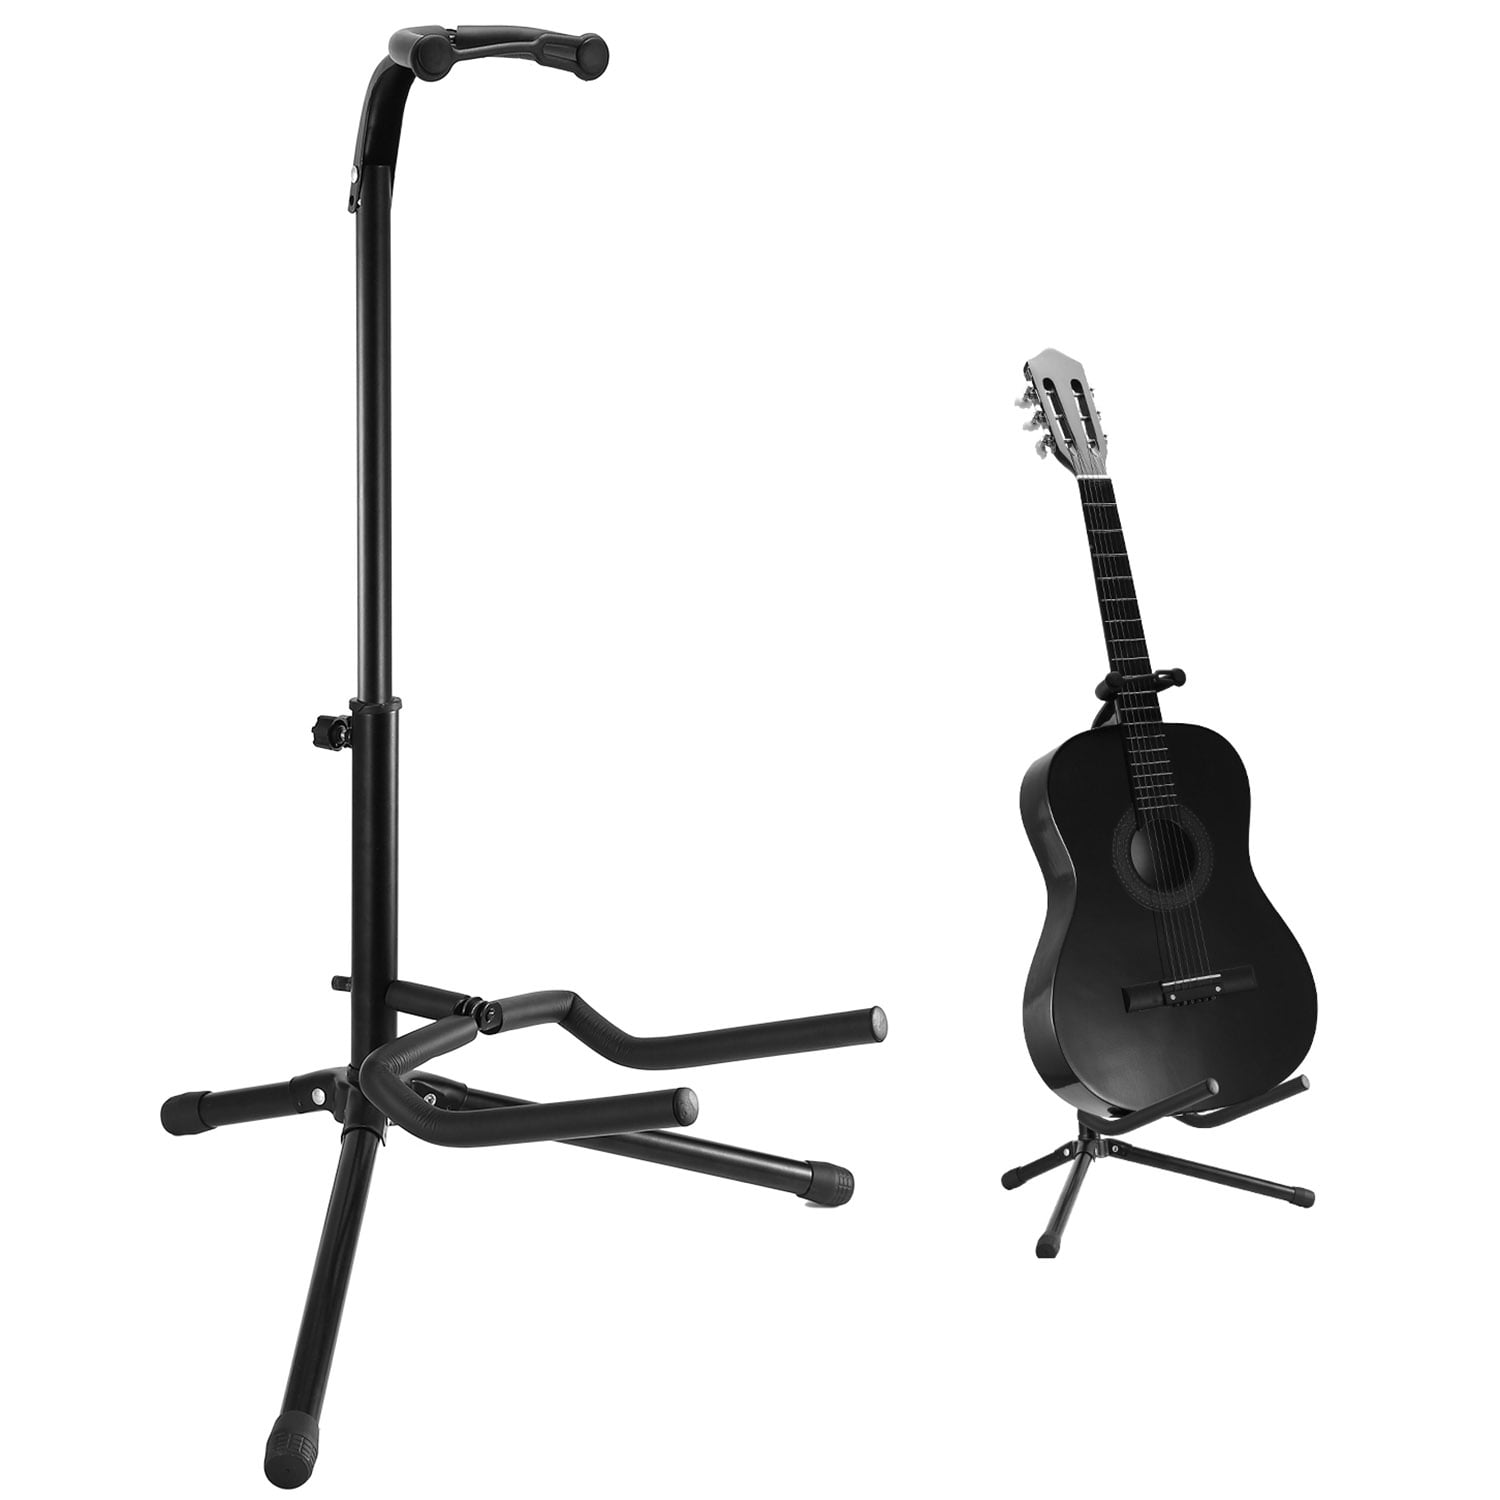 kesoto Black Cellos Guitars Holder Stand Rack Musical Instrument Storage/Display Accessory 